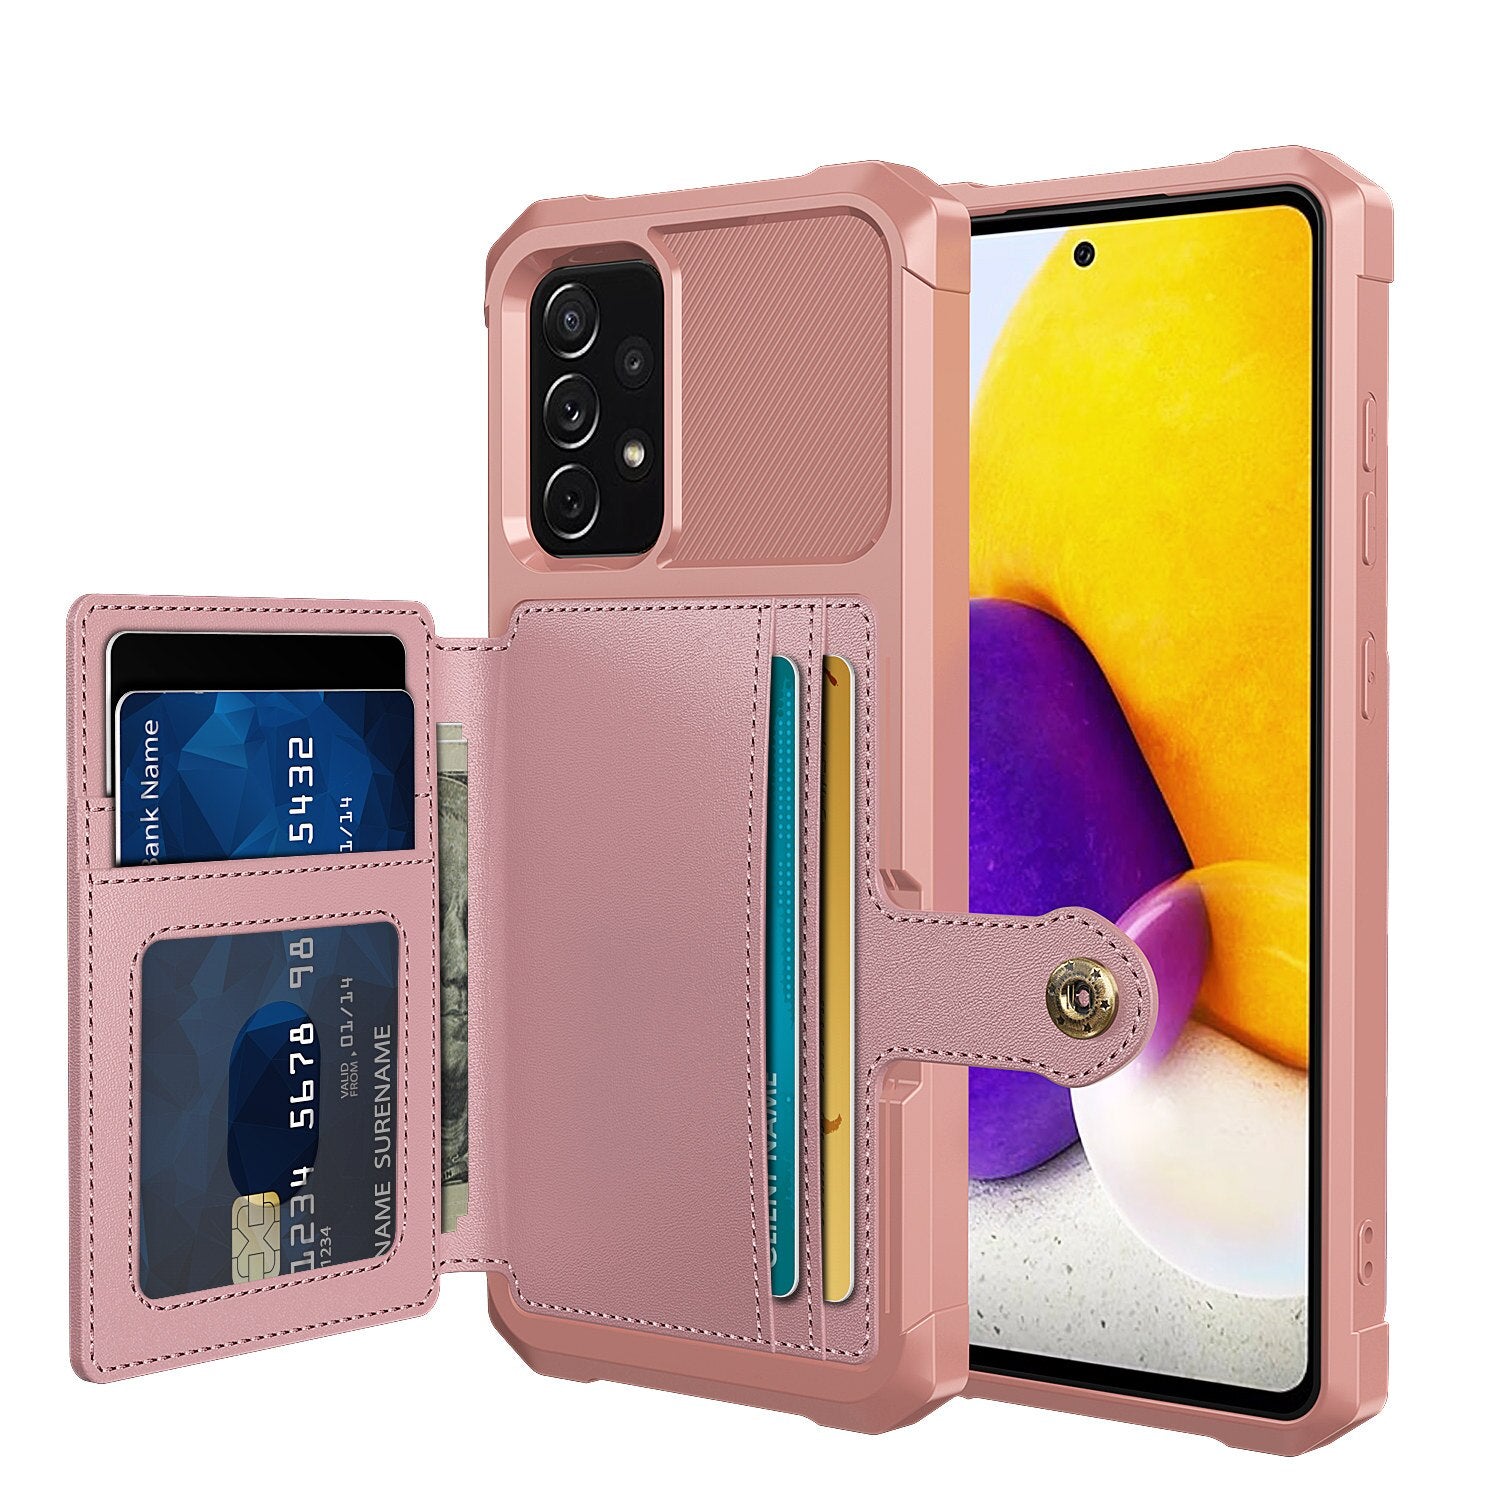 Samsung Galaxy A52/A72 Wallet Case, Luxury PU Leather Wallet Flip Cover Buckle - 380230 for Galaxy A52 / Rose / United States Find Epic Store